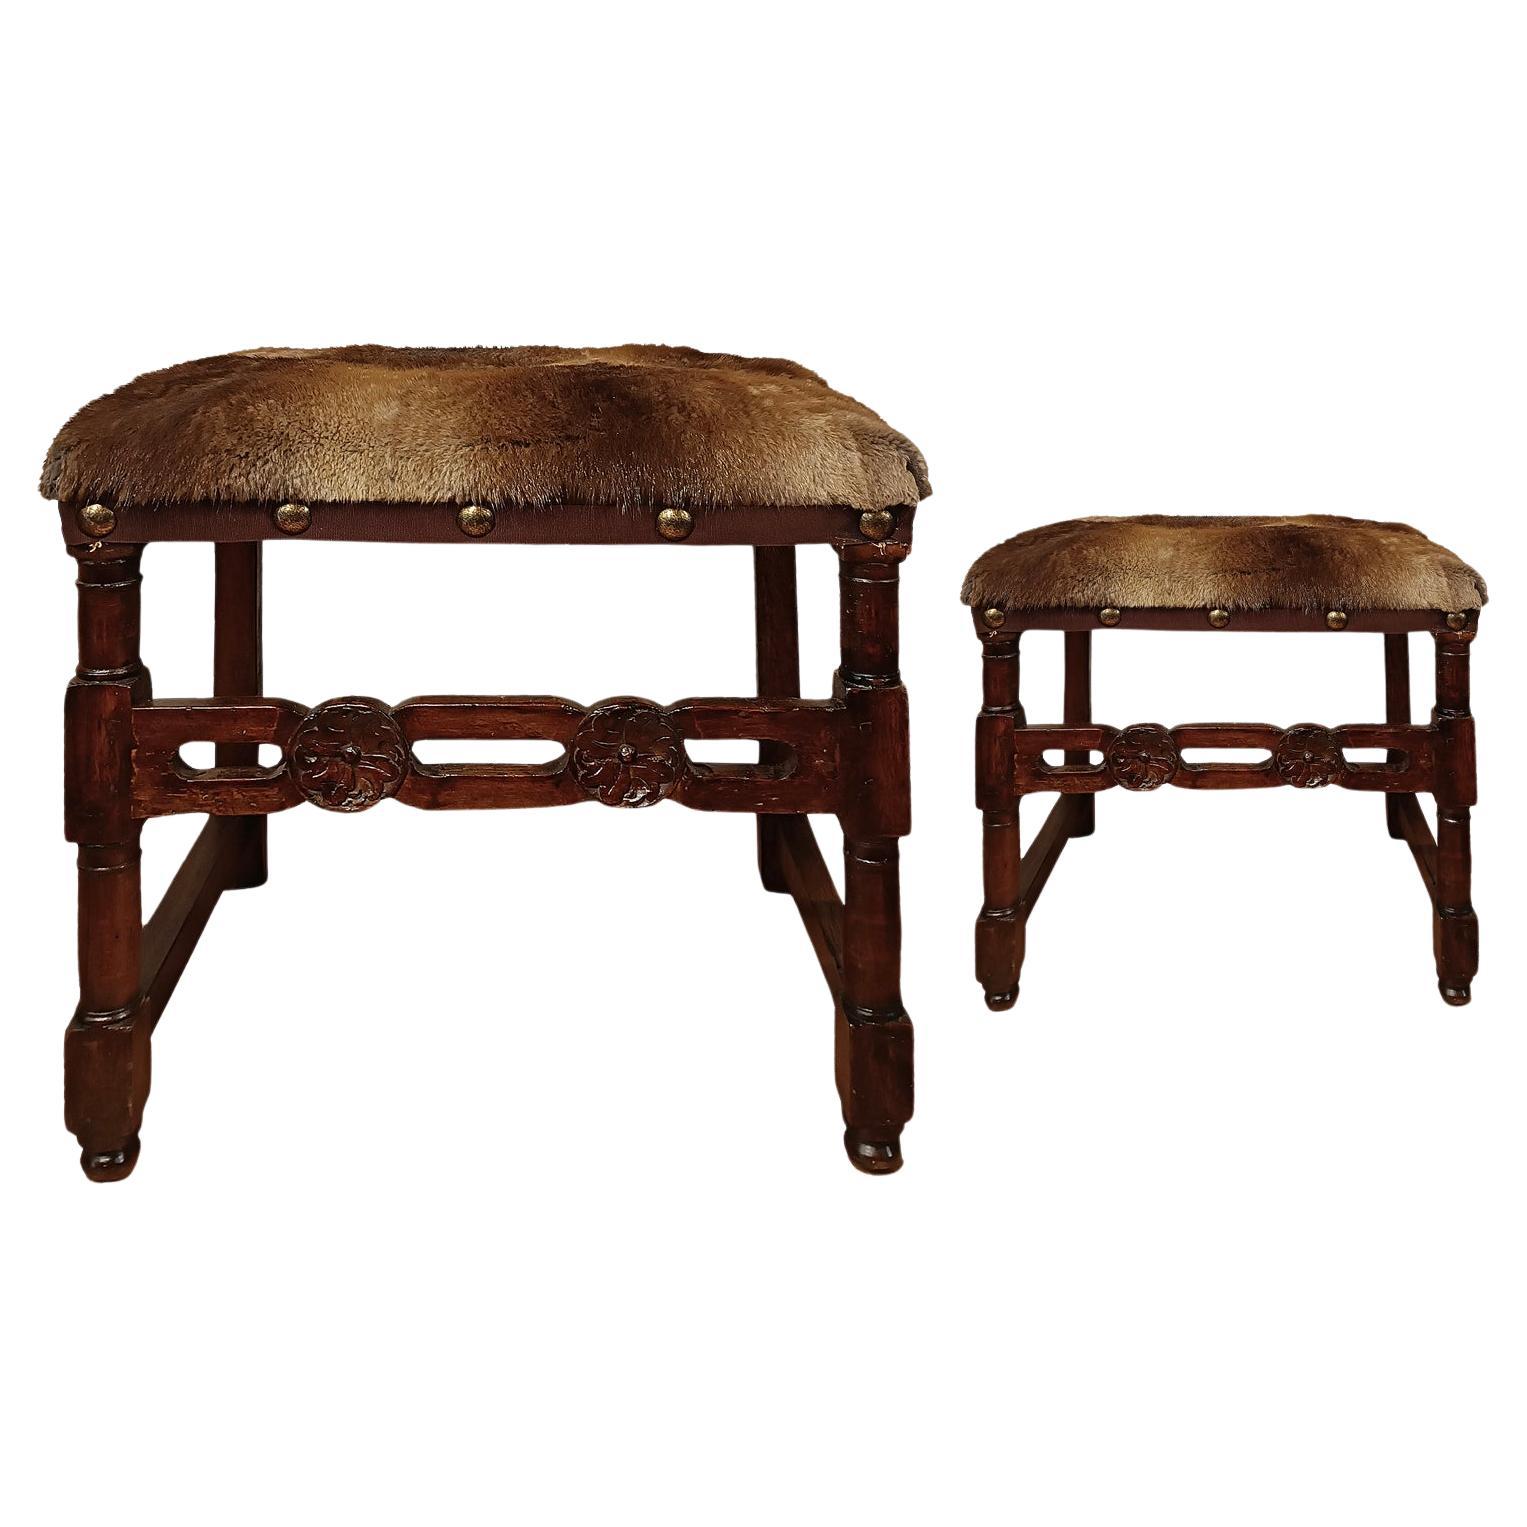 16th CENTURY RENAISSANCE STOOLS IN MINK For Sale